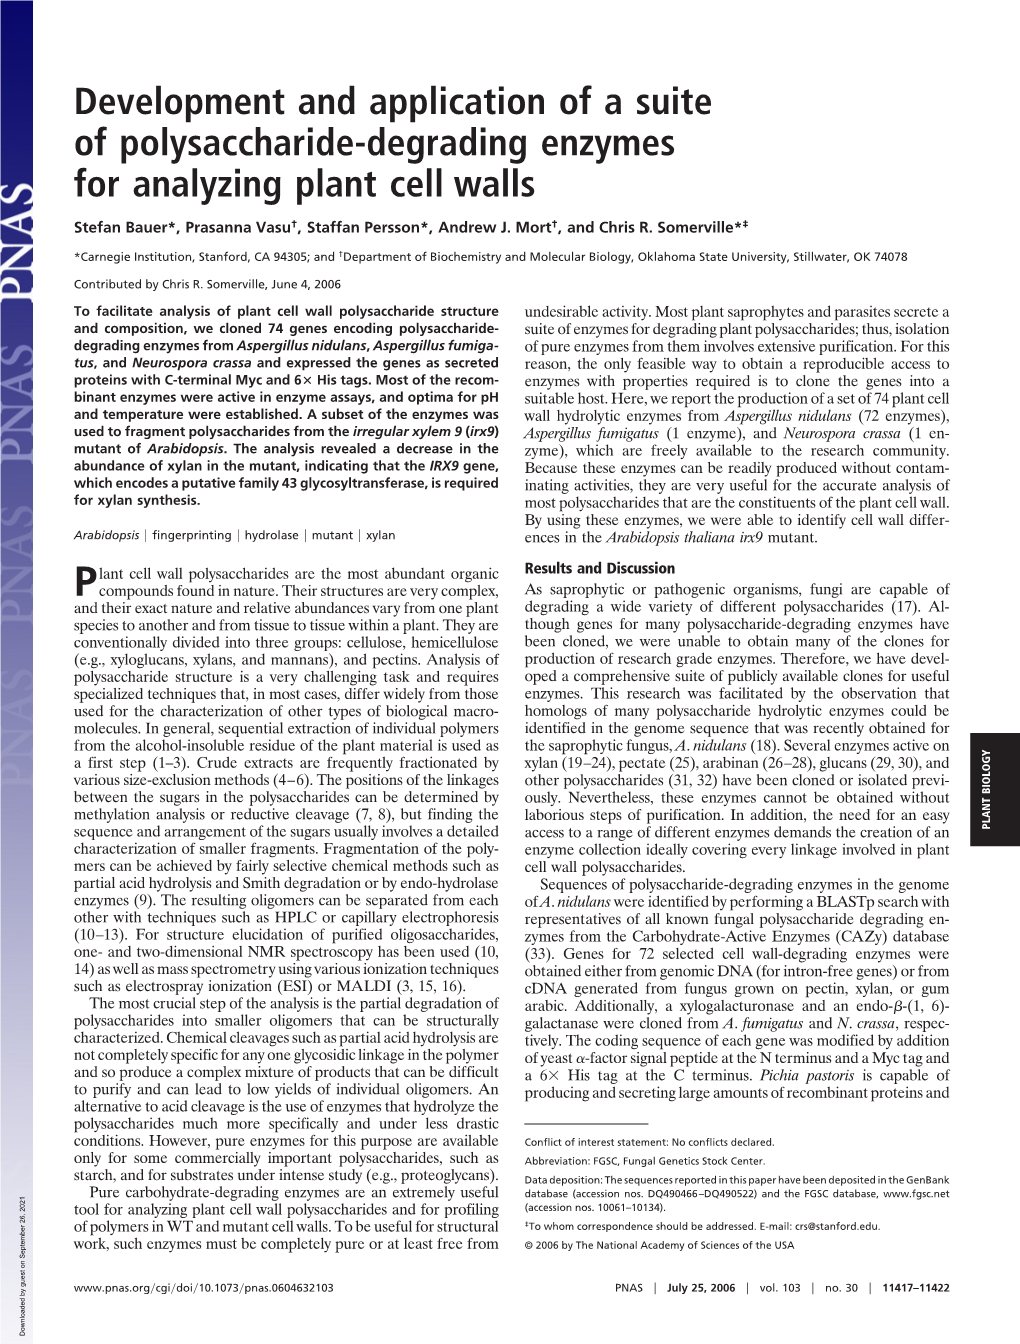 Development and Application of a Suite of Polysaccharide-Degrading Enzymes for Analyzing Plant Cell Walls